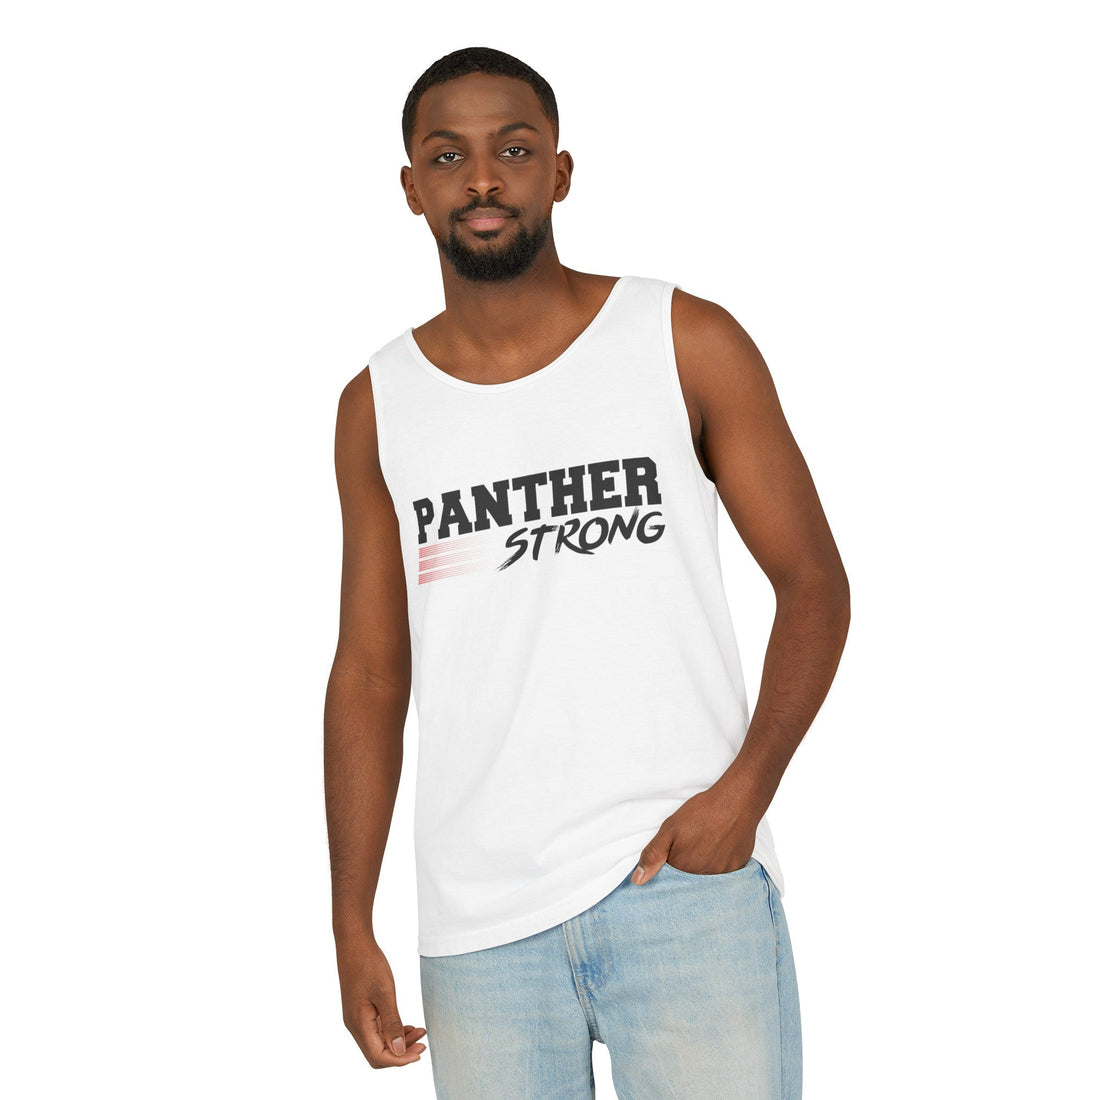 Panther Strong Unisex Garment - Dyed Tank Top - Tank Top - Positively Sassy - Panther Strong Unisex Garment - Dyed Tank Top